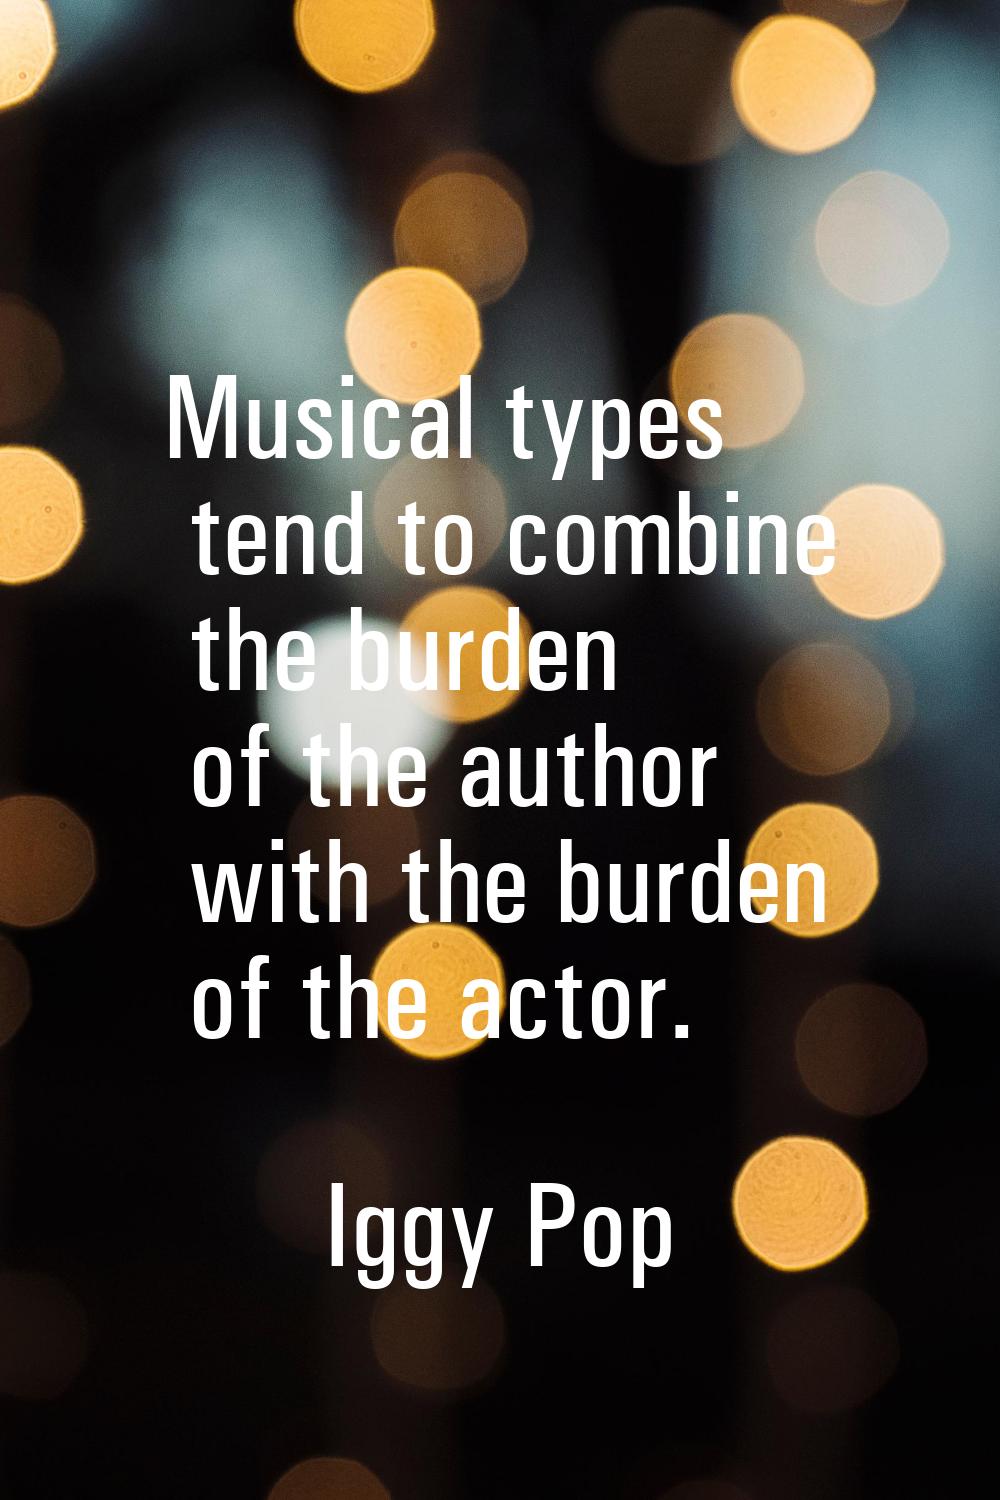 Musical types tend to combine the burden of the author with the burden of the actor.